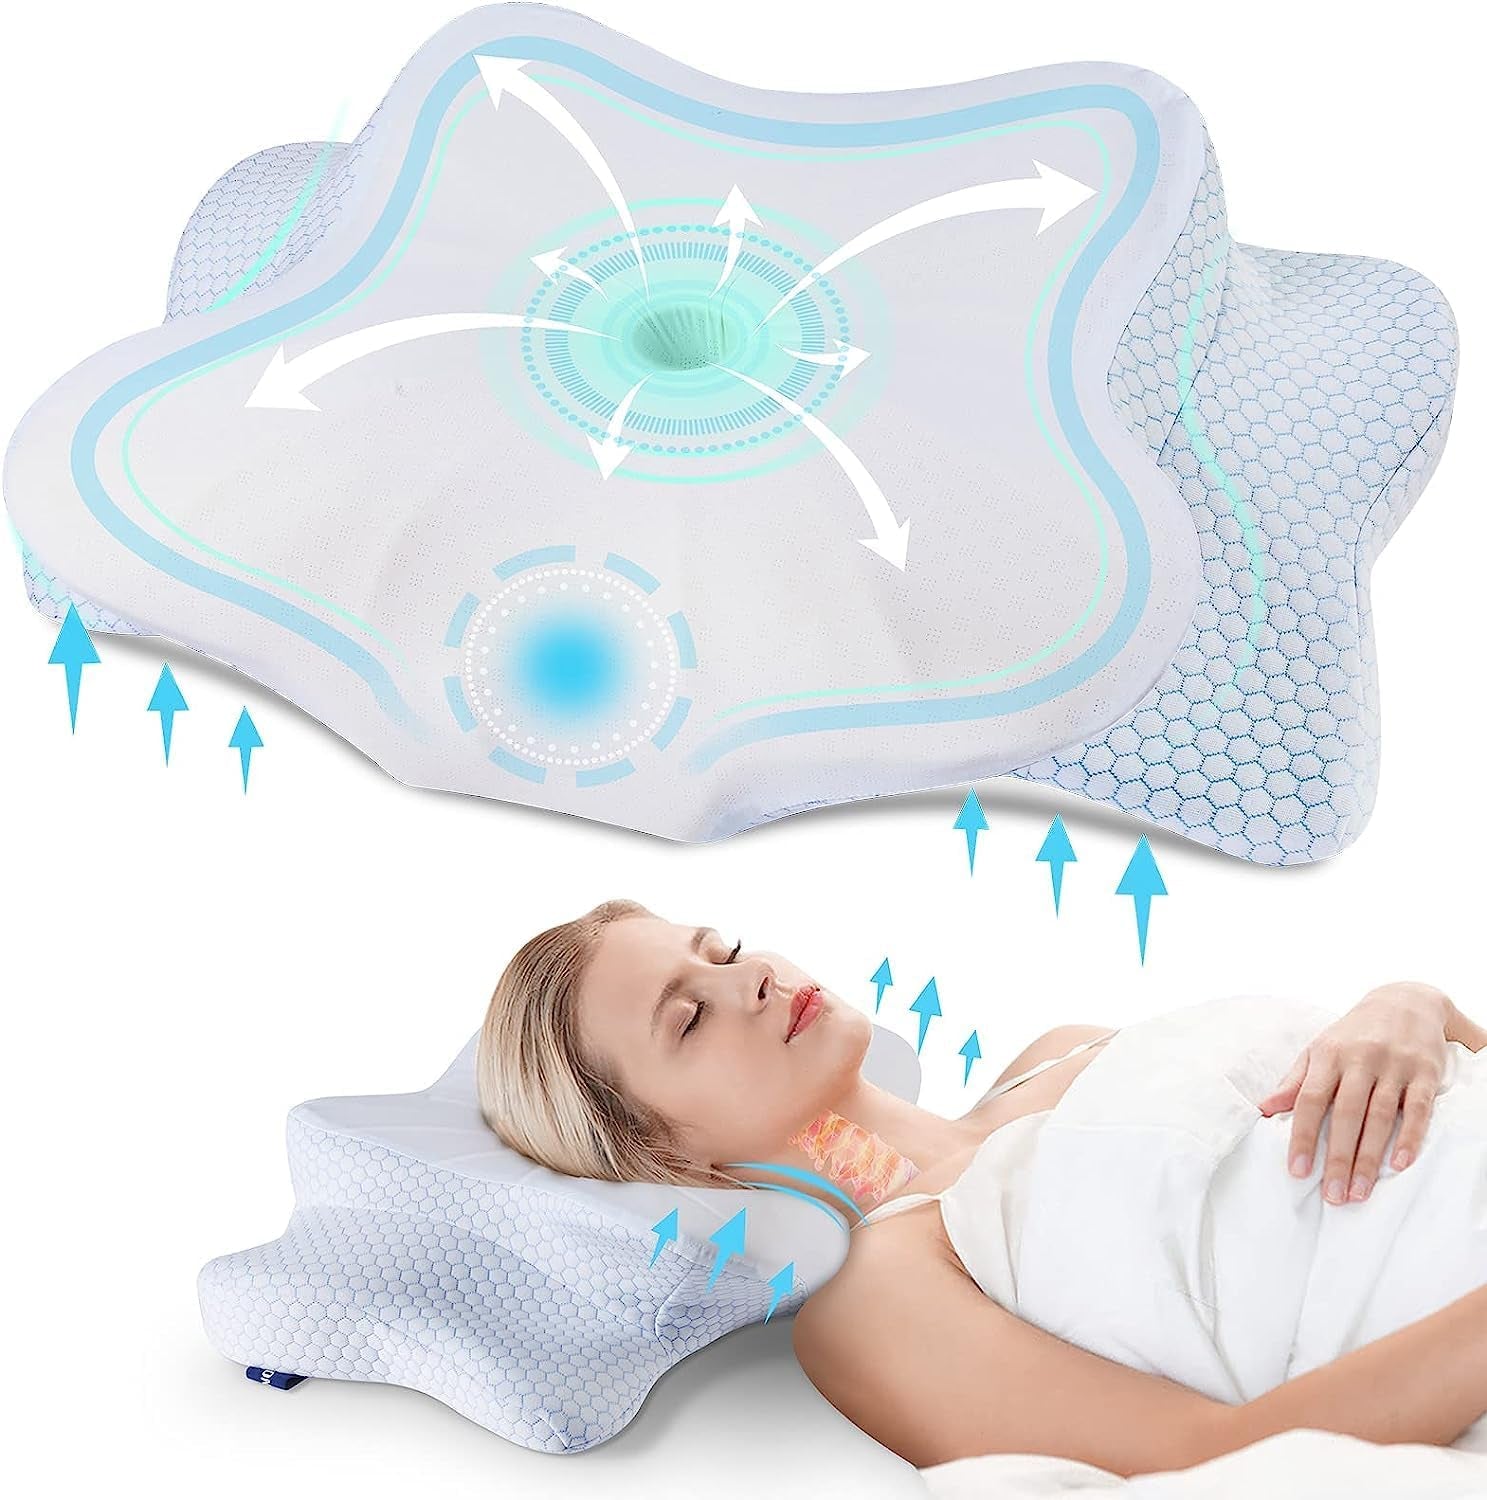 DONAMA Orthopedic Cervical Pillow for Neck Pain Relief with Memory Foam - Blue